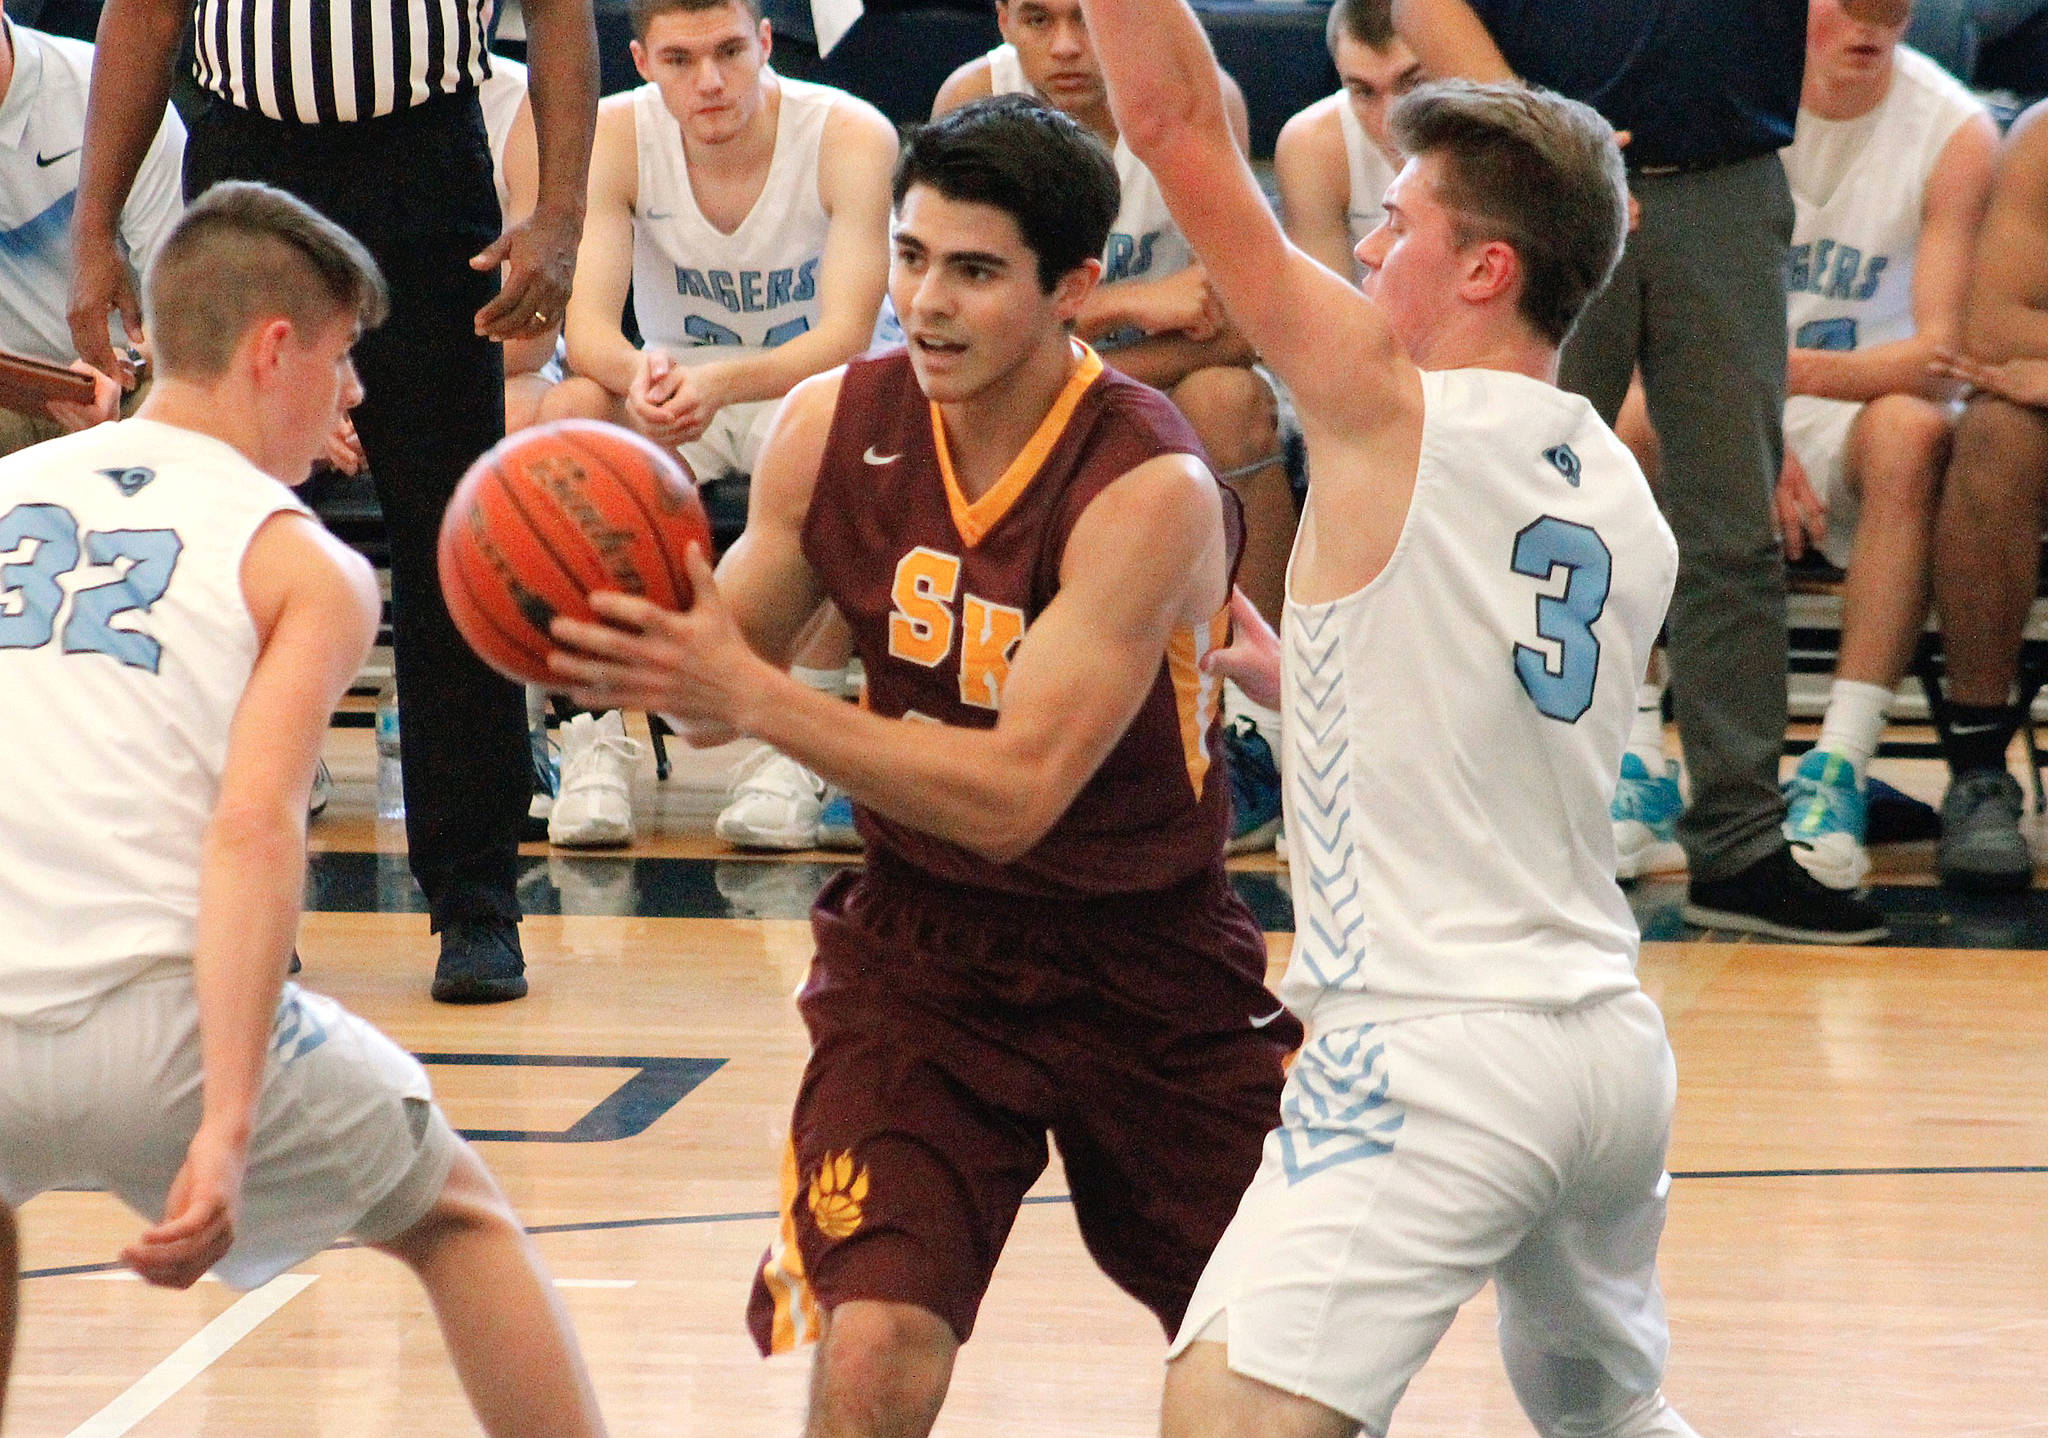 South Kitsap’s Jonathan Walters looked for a way to the hoop while sandwiched by two Rogers defenders in their tiebreaker game Saturday. (Mark Krulish/Kitsap News Group)